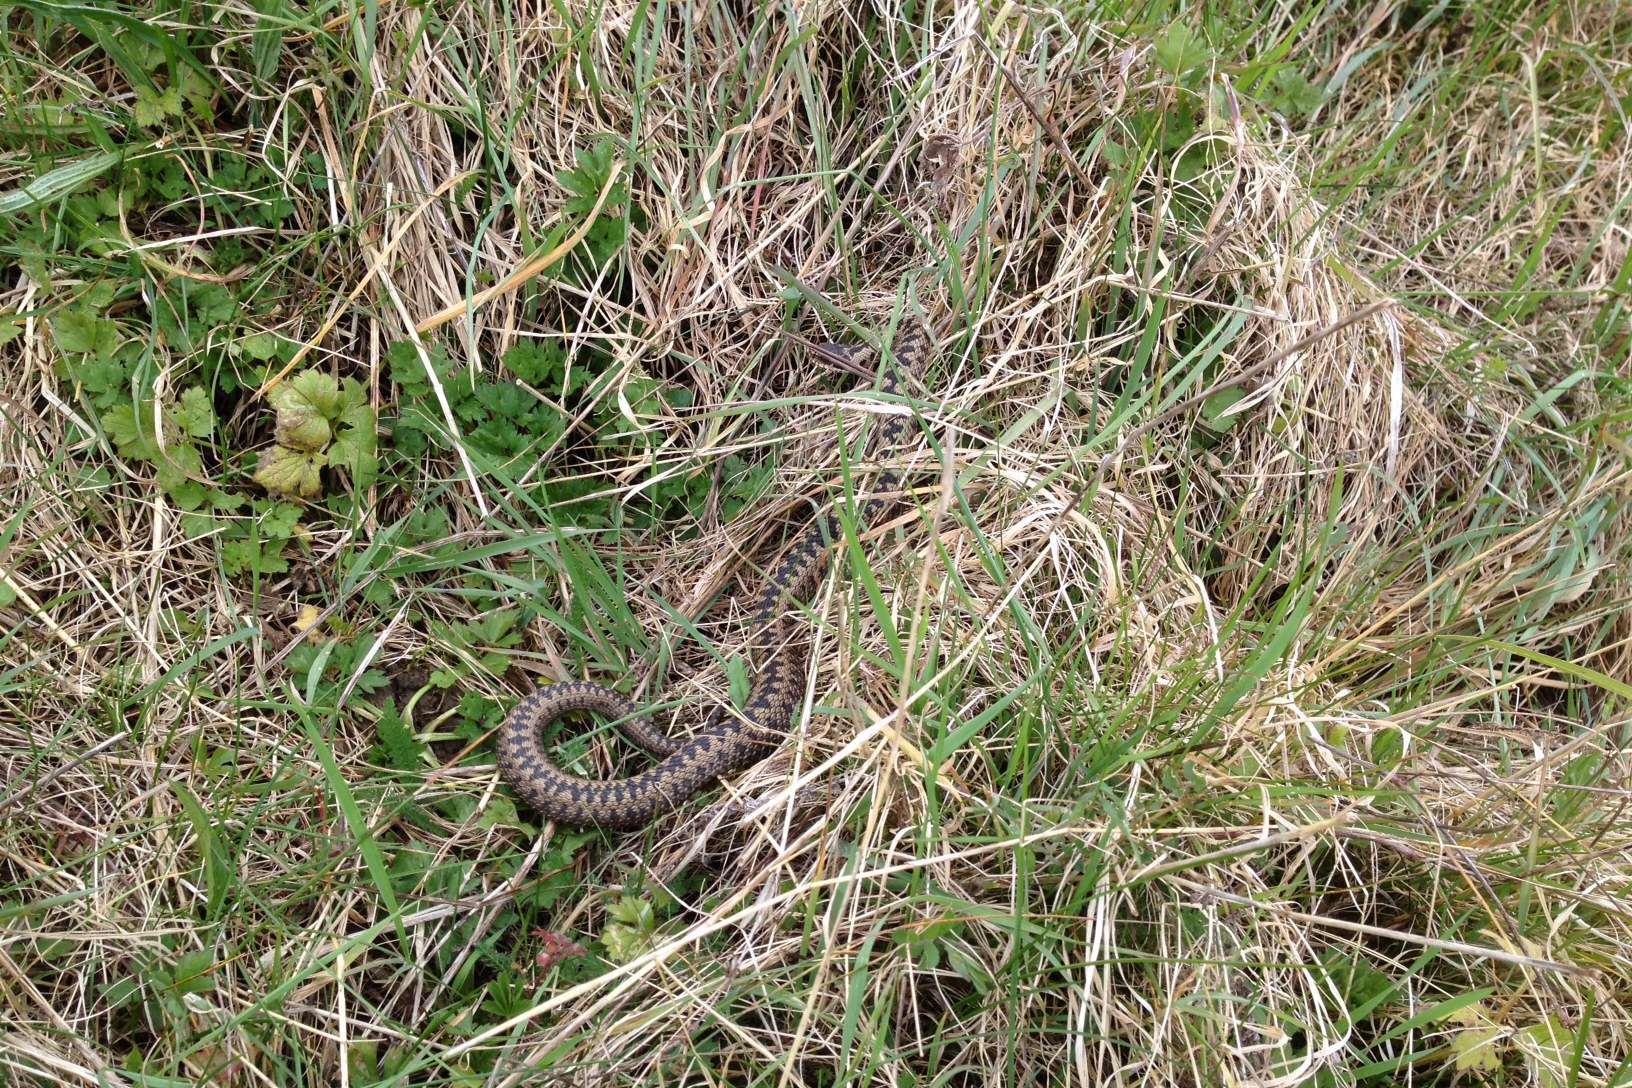 An adder in the grass at Furfield in Boughton Monchelsea